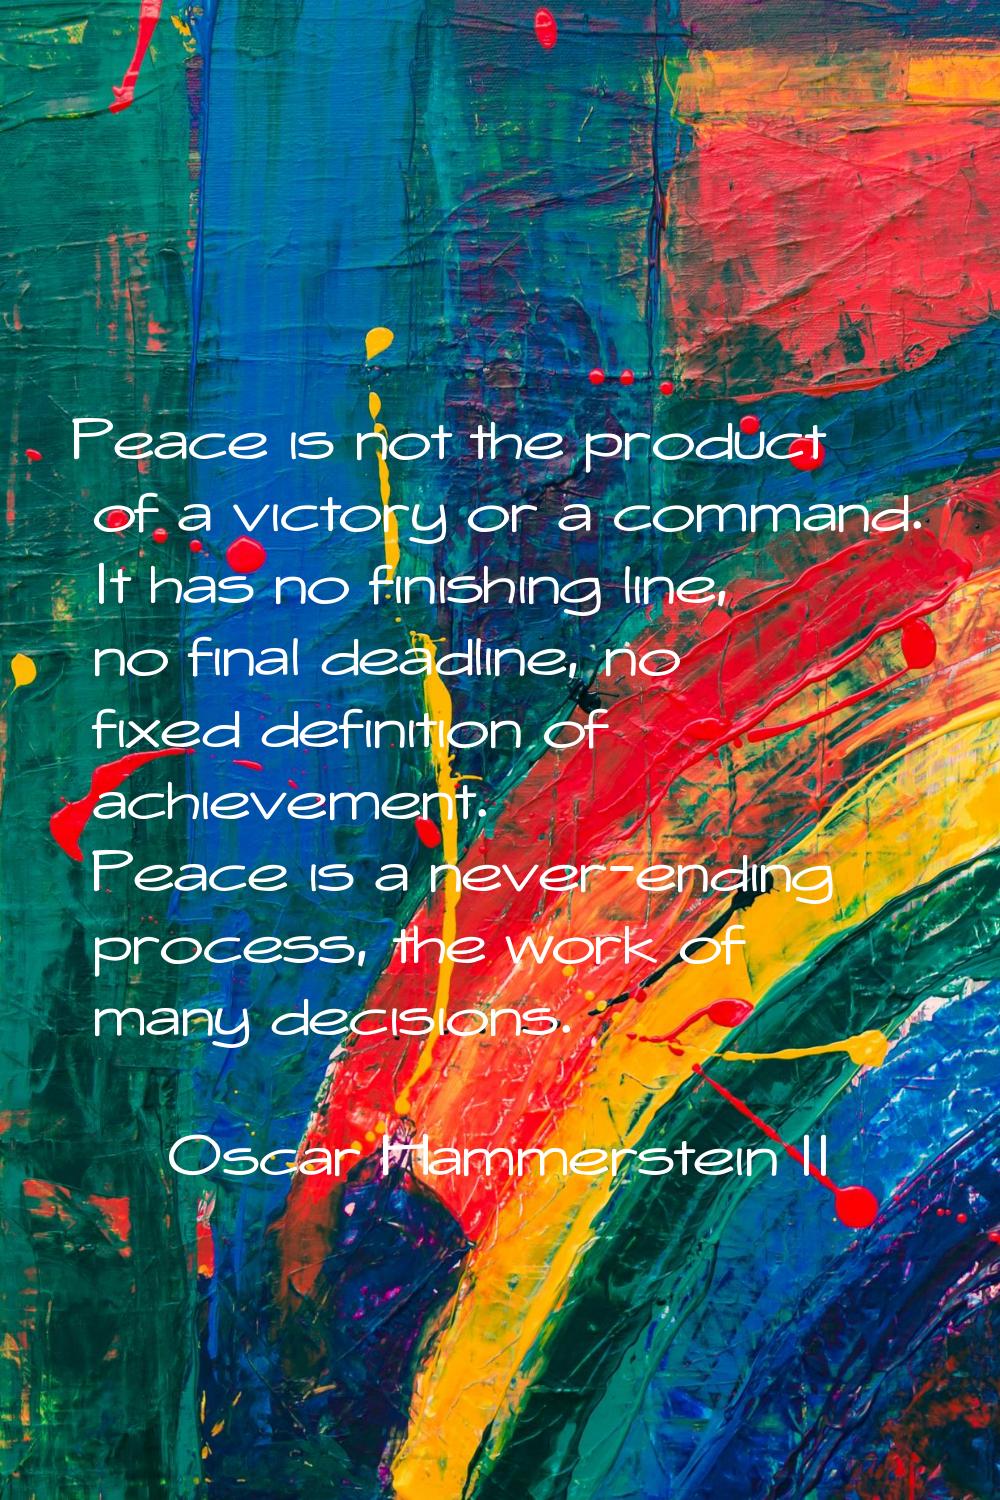 Peace is not the product of a victory or a command. It has no finishing line, no final deadline, no